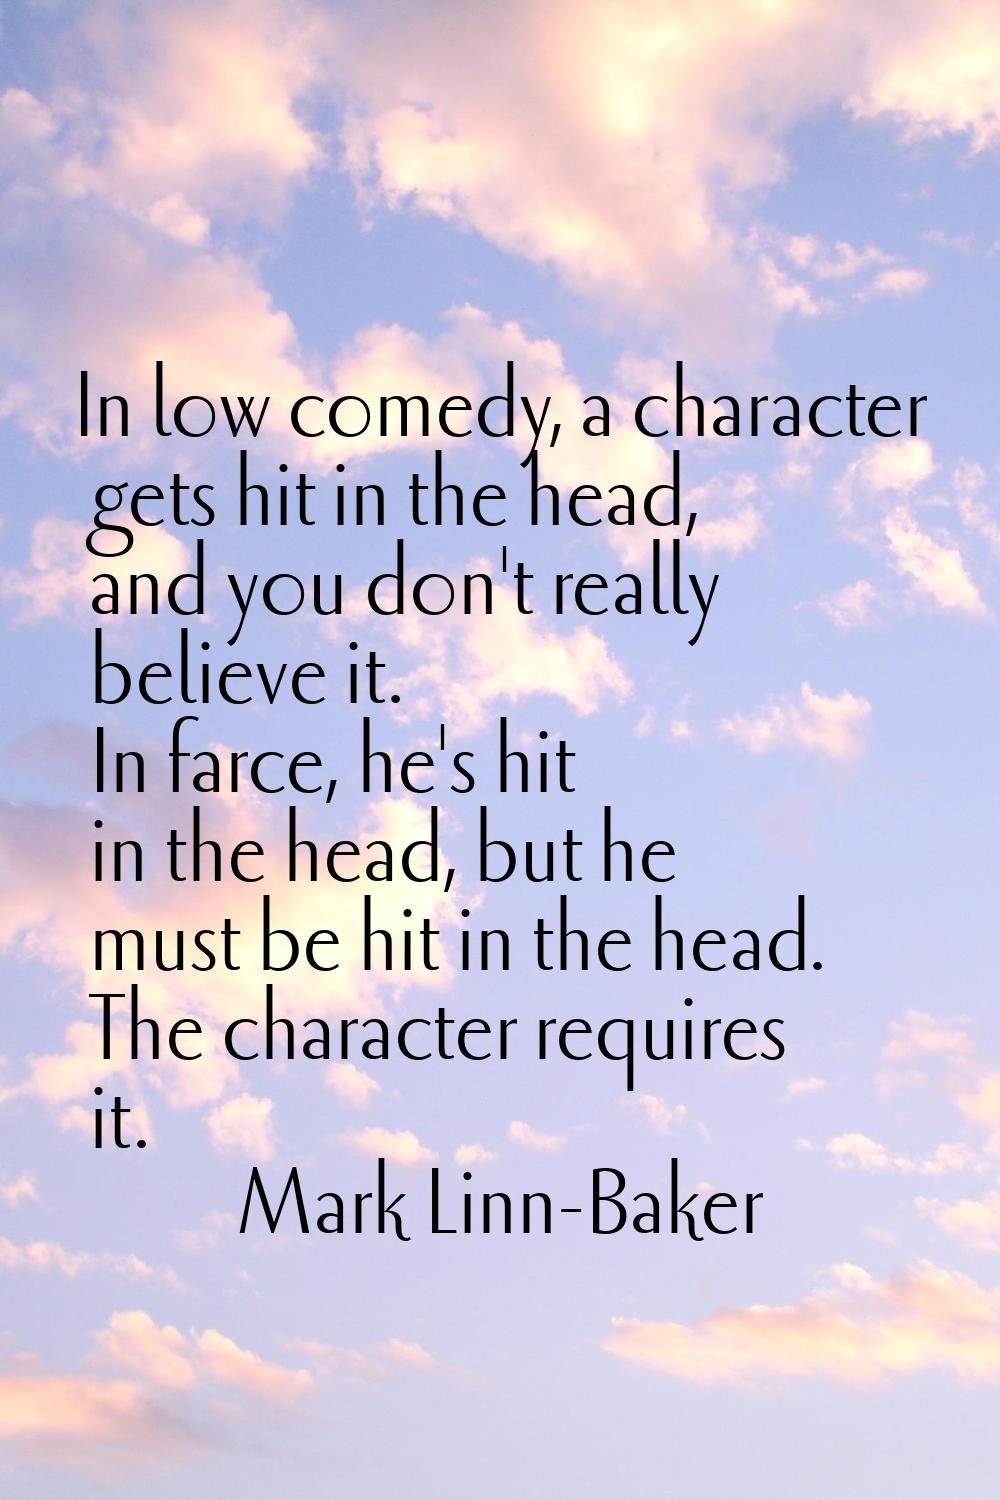 In low comedy, a character gets hit in the head, and you don't really believe it. In farce, he's hi